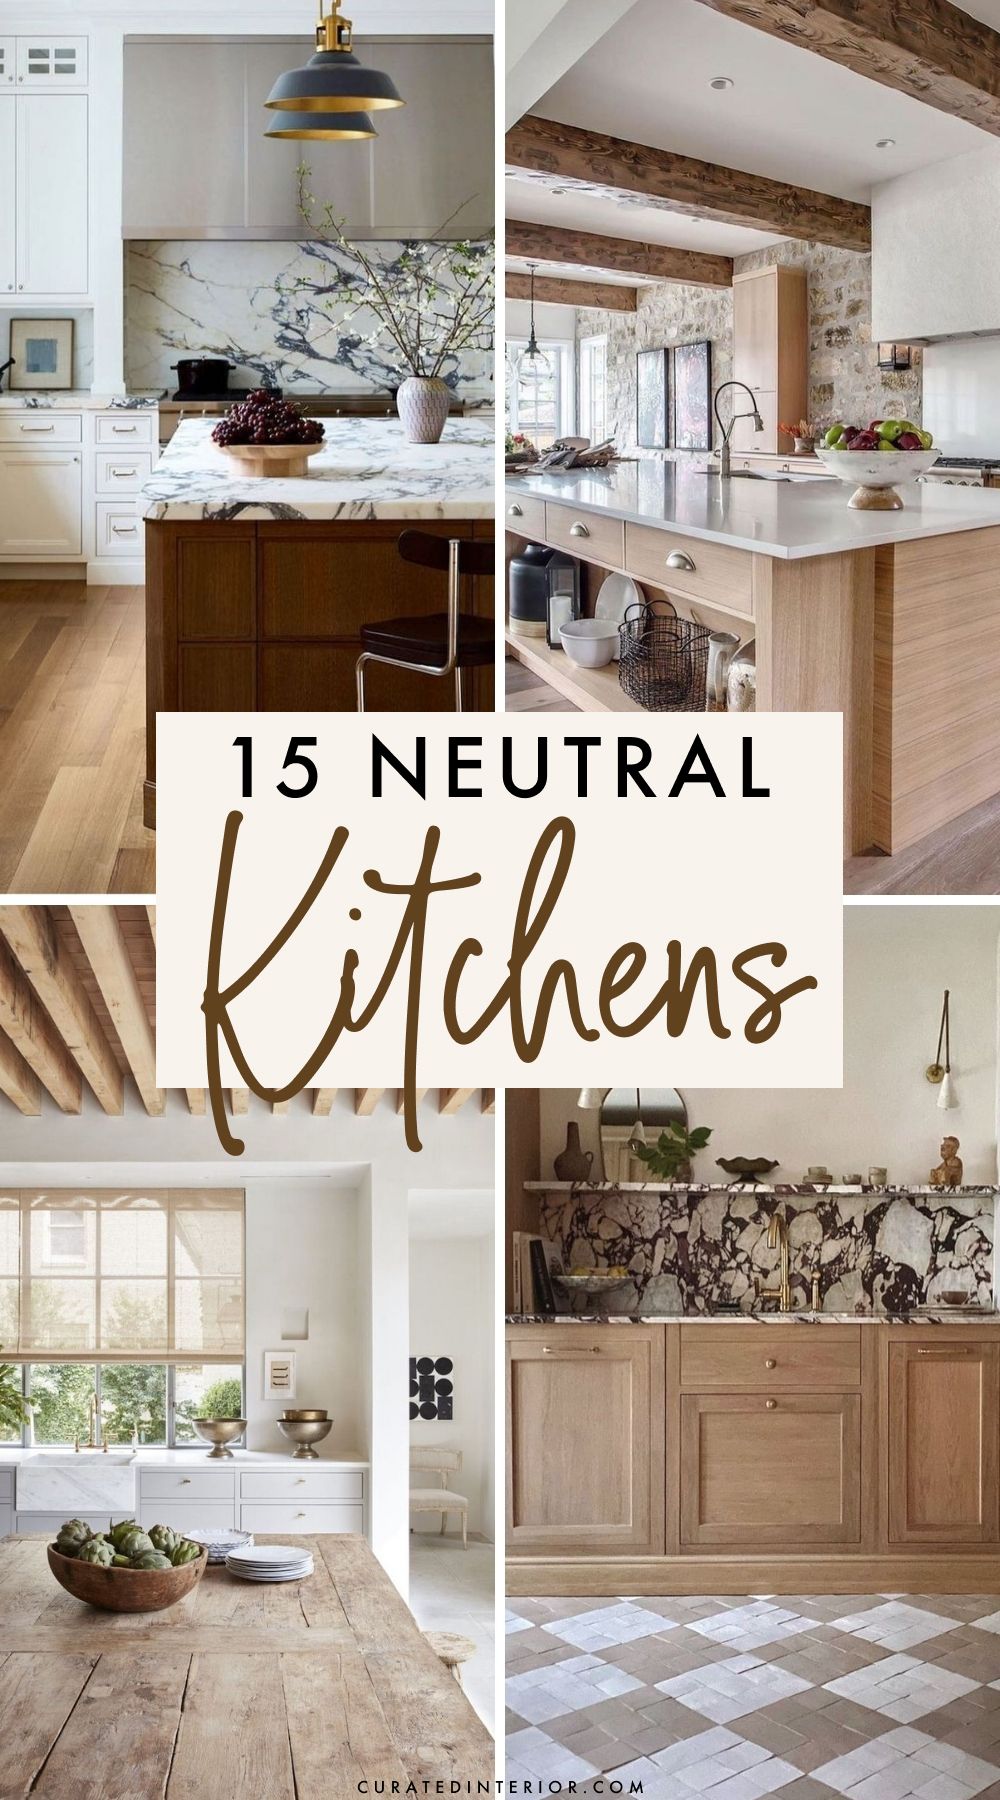 Kitchen Remodel with a Neutral Color Scheme